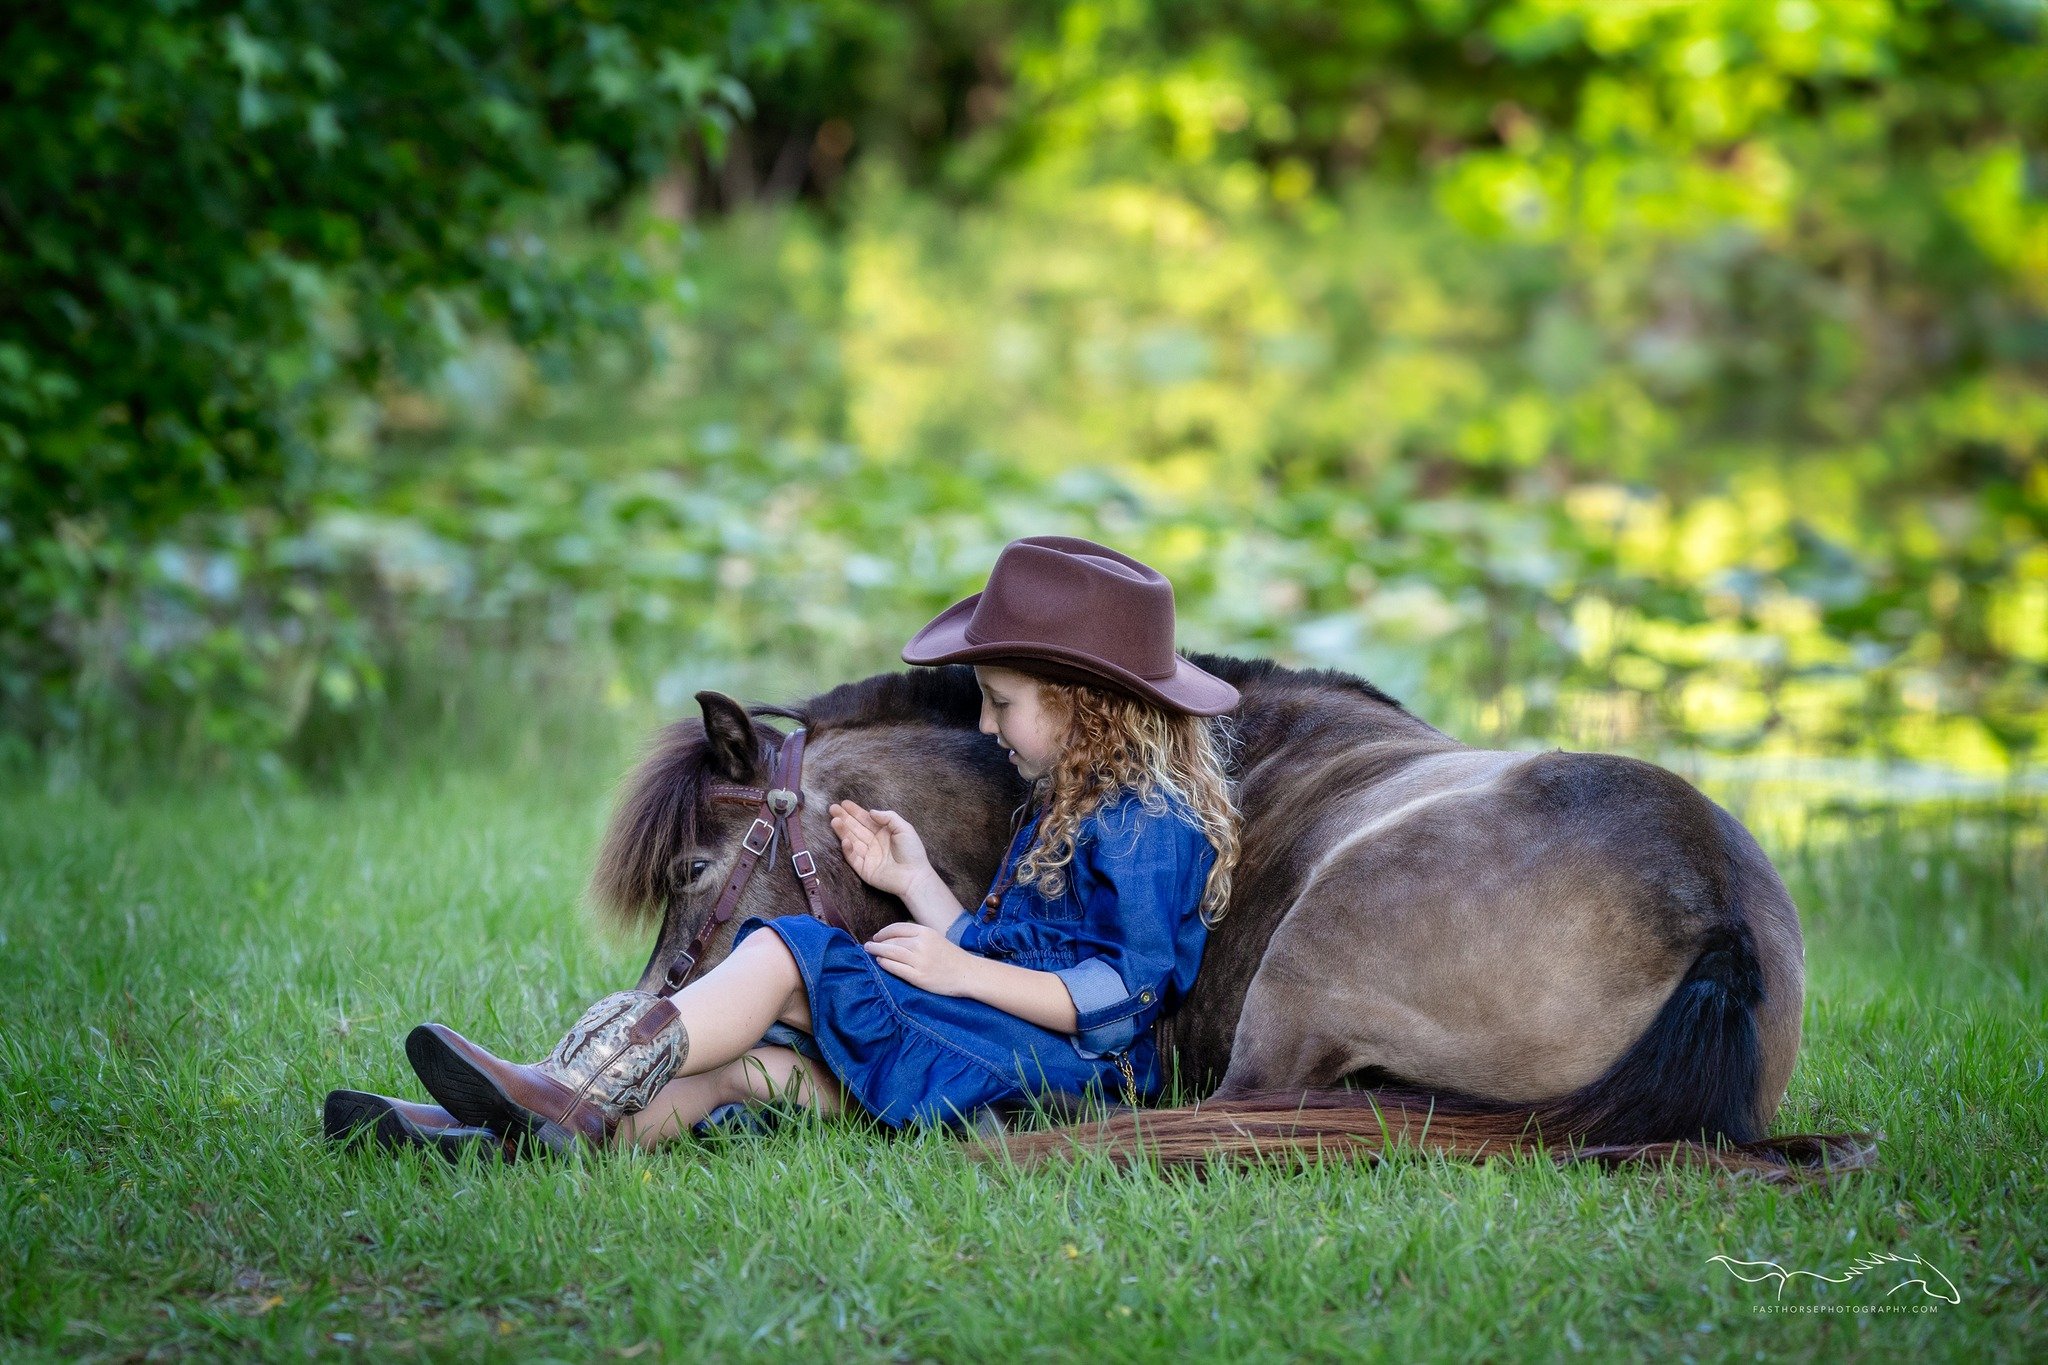 Go ahead and try to tell me this isn't a moment that all little horse girls dream of. I won't believe you. 

Pictured: Rhea &amp; Chanel who modeled together at our Cowgirls with Cameras Equine Photography Essentials Workshop. 

@whalepony @cowgirlsw